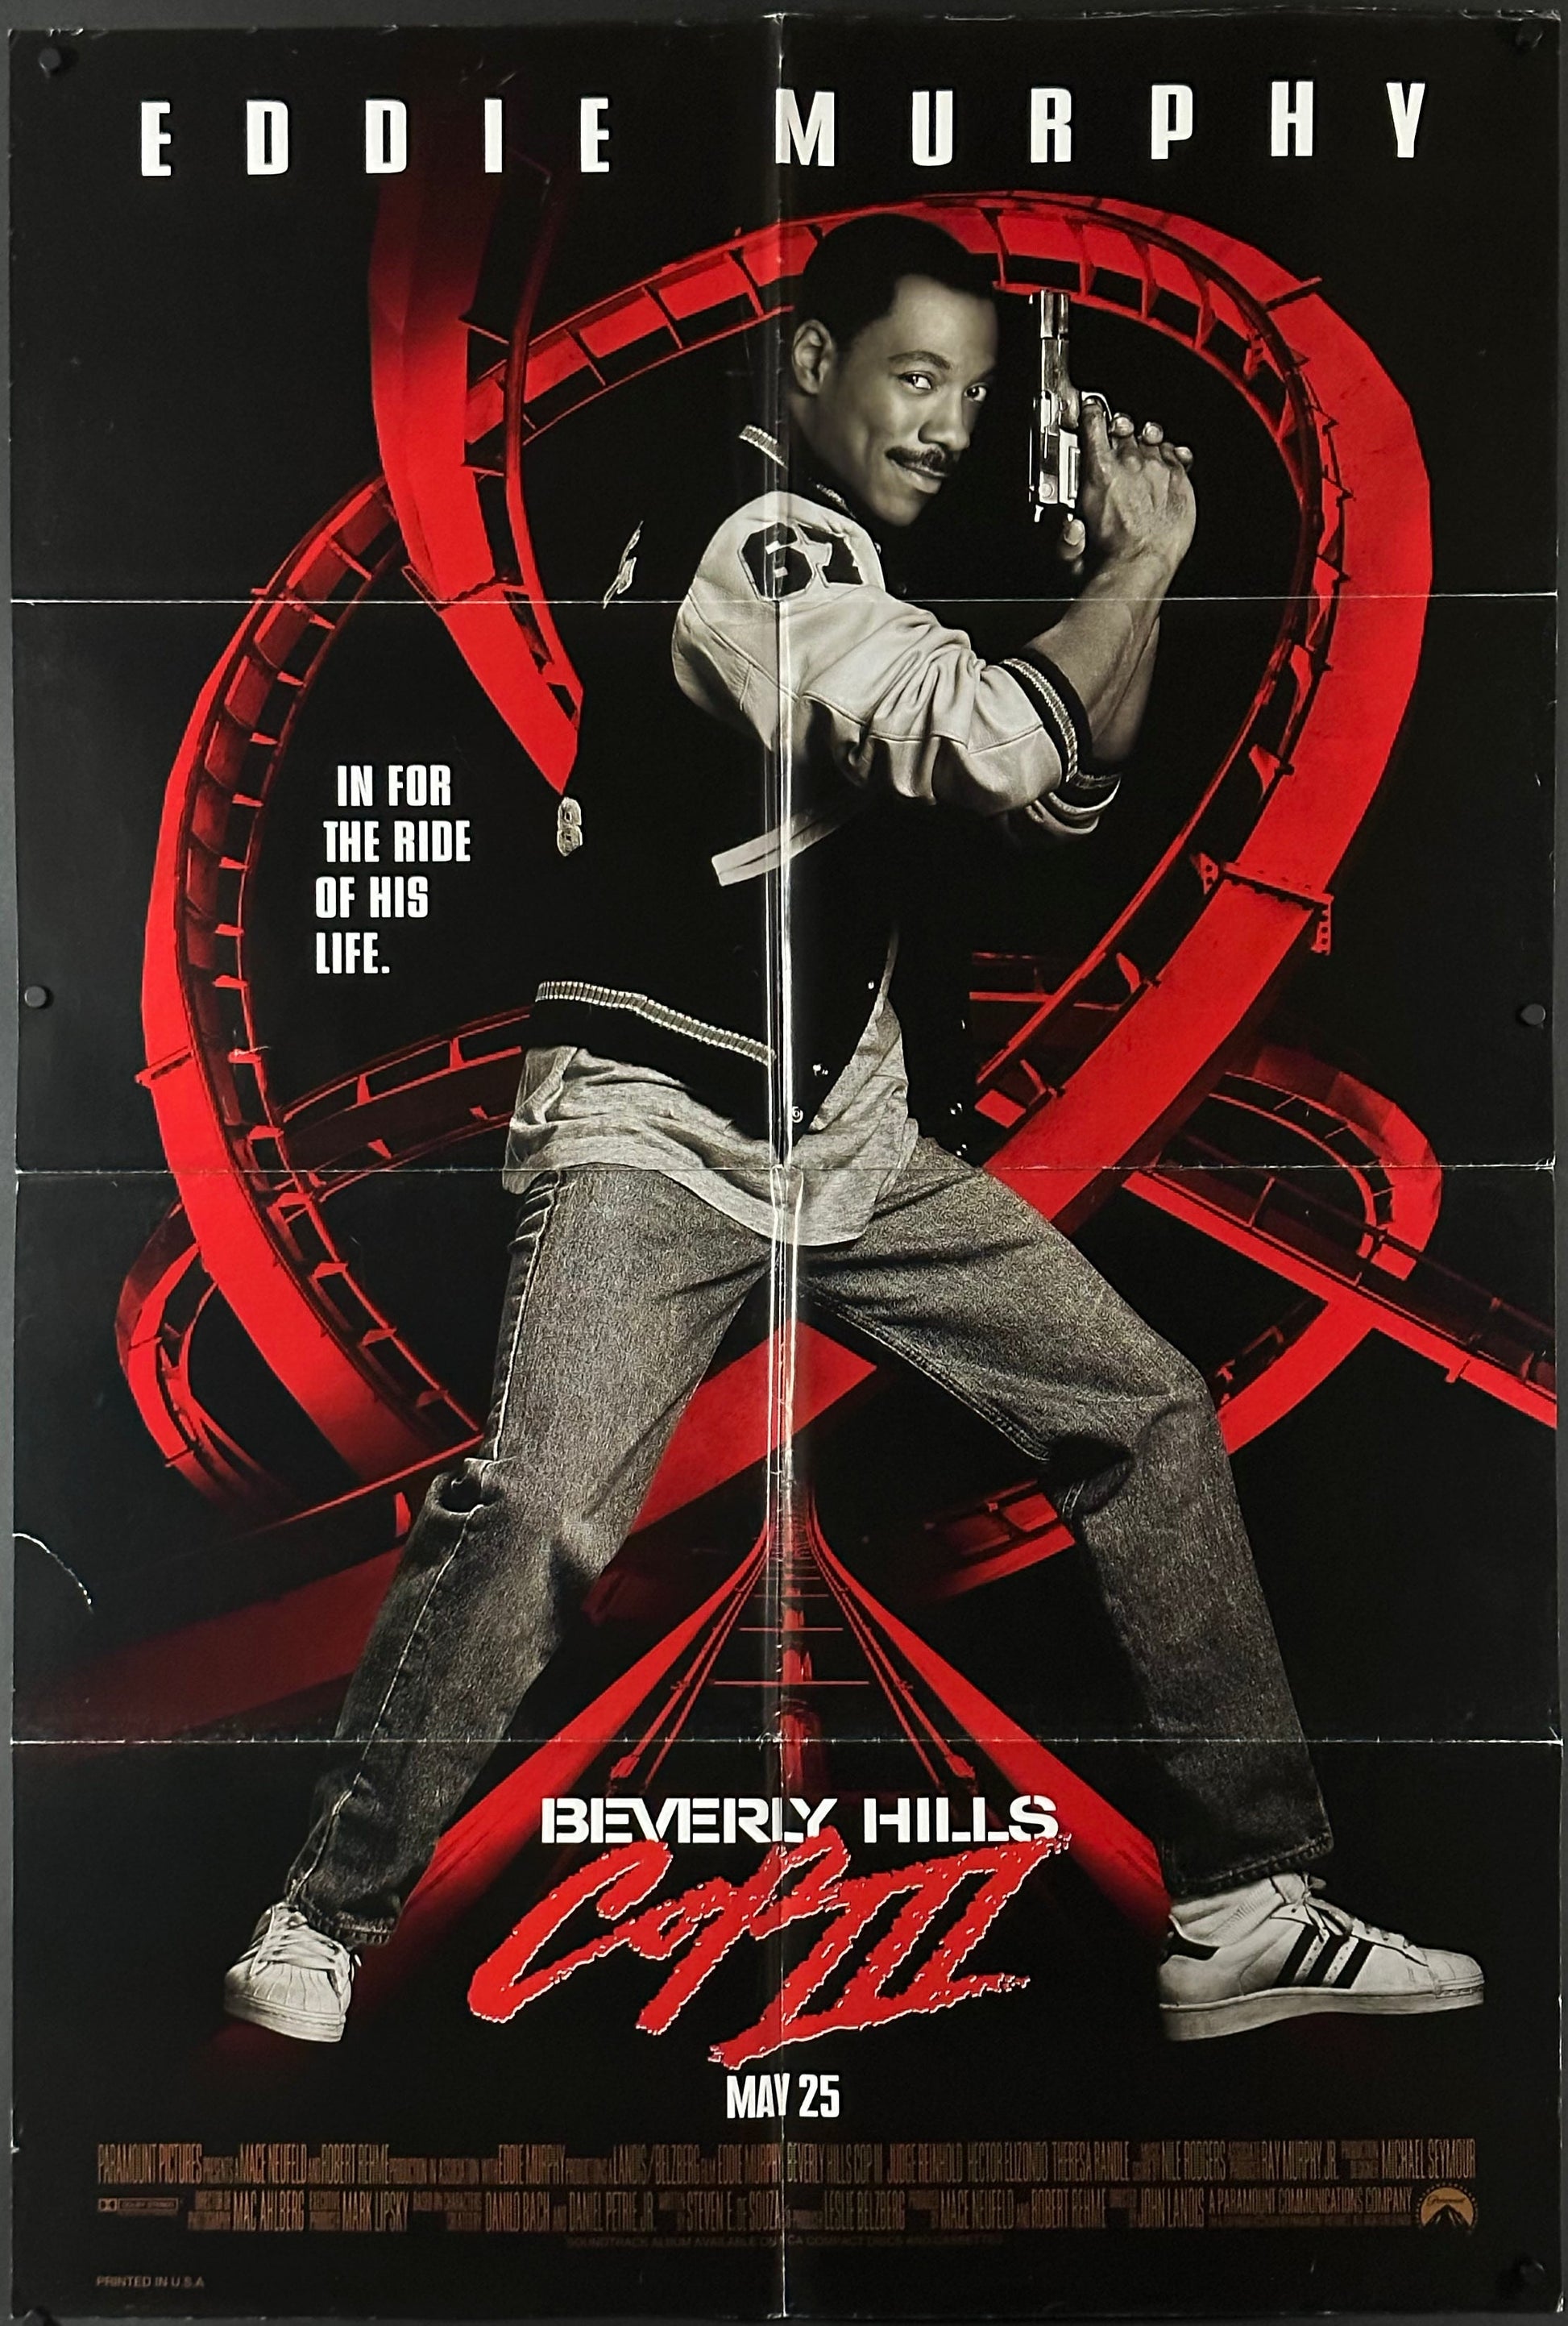 Beverly Hills Cop III US One Sheet (1994) - ORIGINAL RELEASE - posterpalace.com